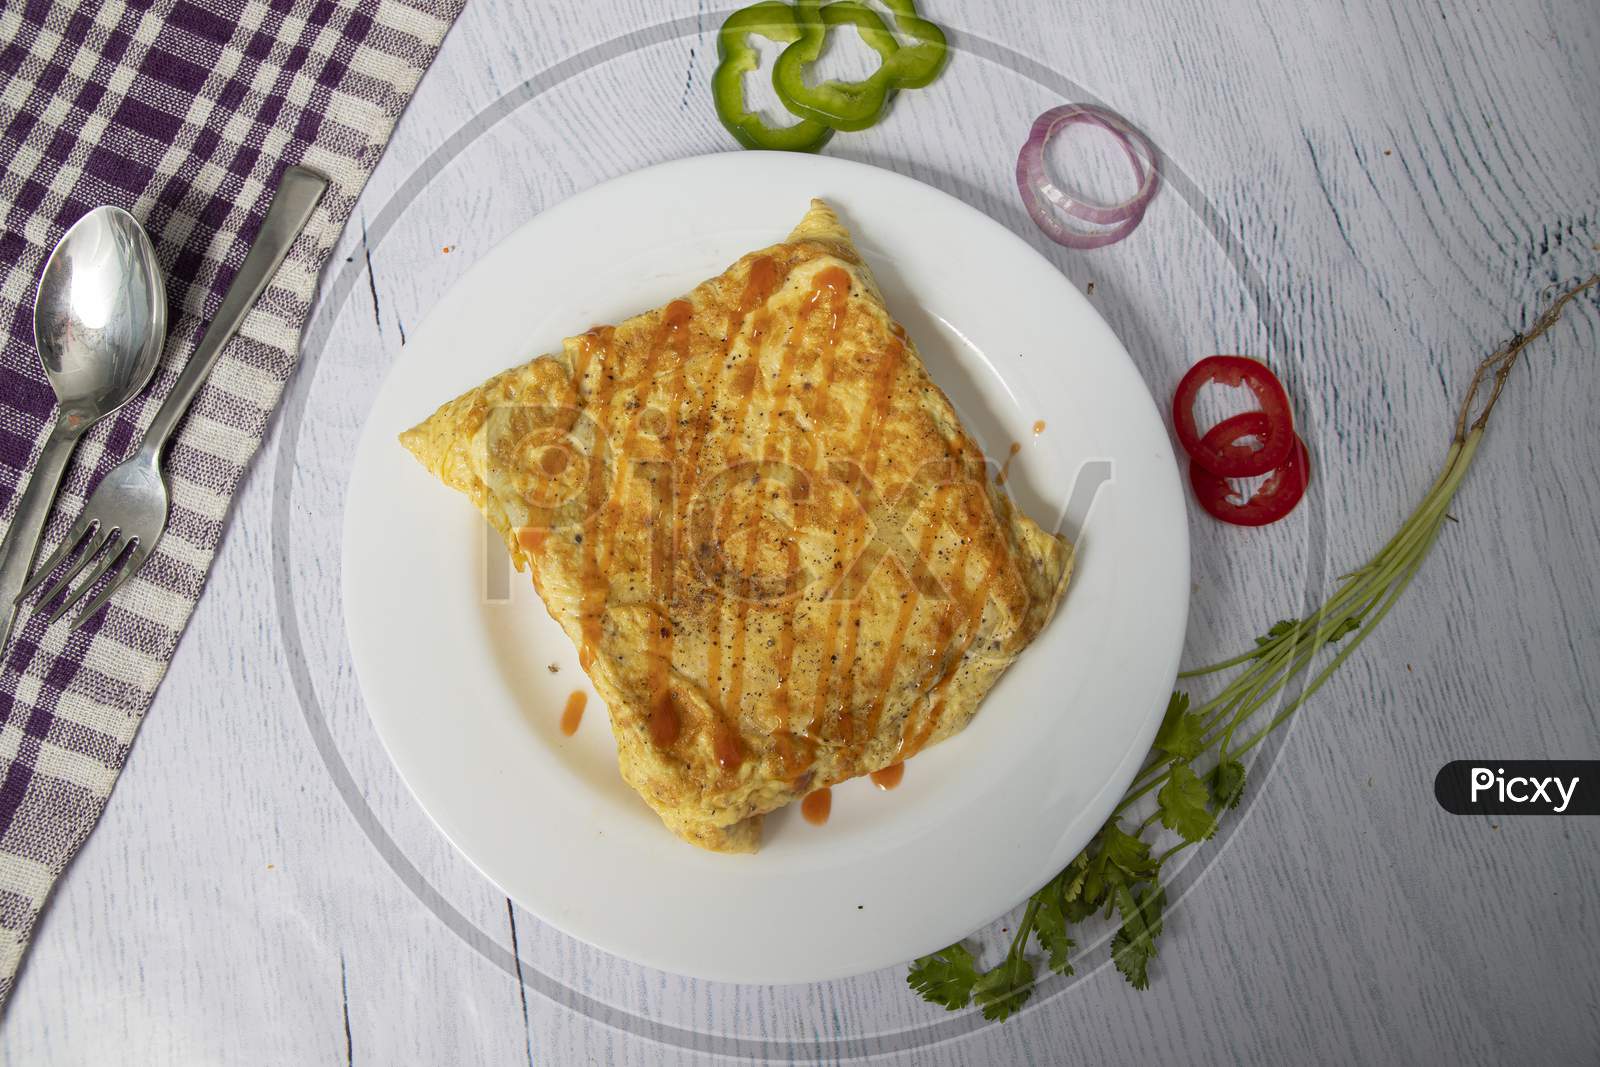 A plate of Bread omlette.